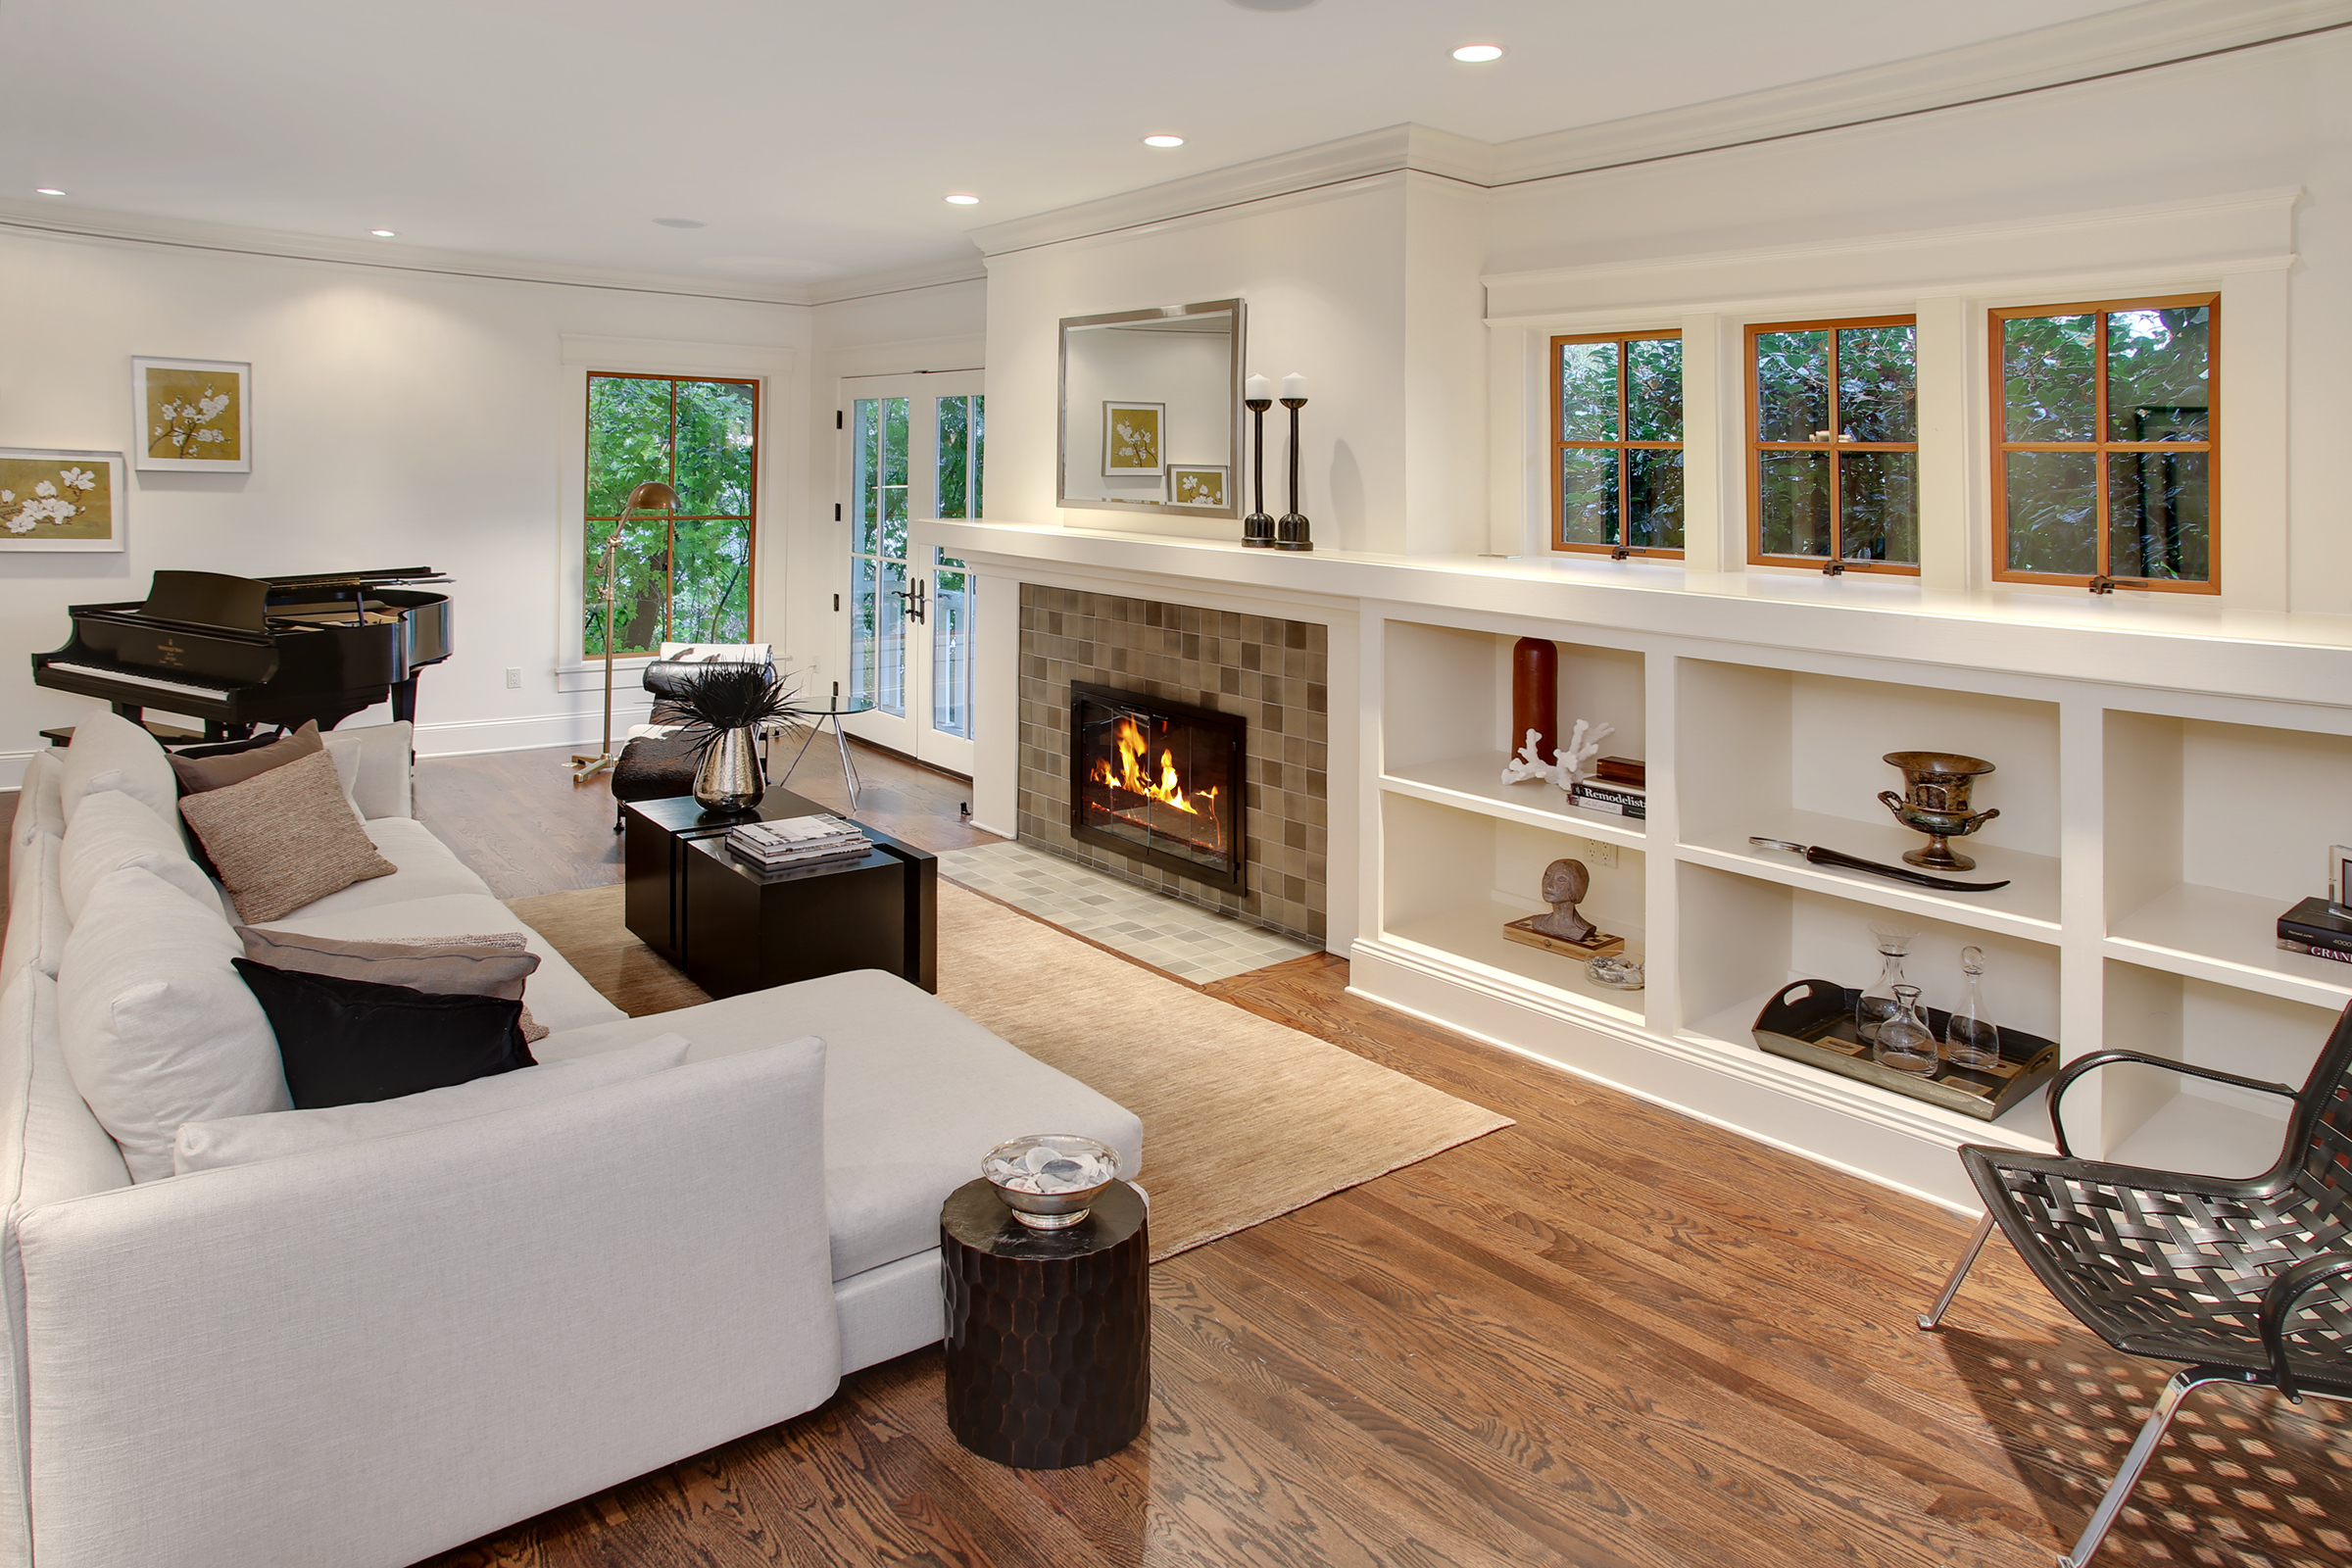 Property Photo: Formal living room with fireplace 115 Maiden Lane E  WA 98112 